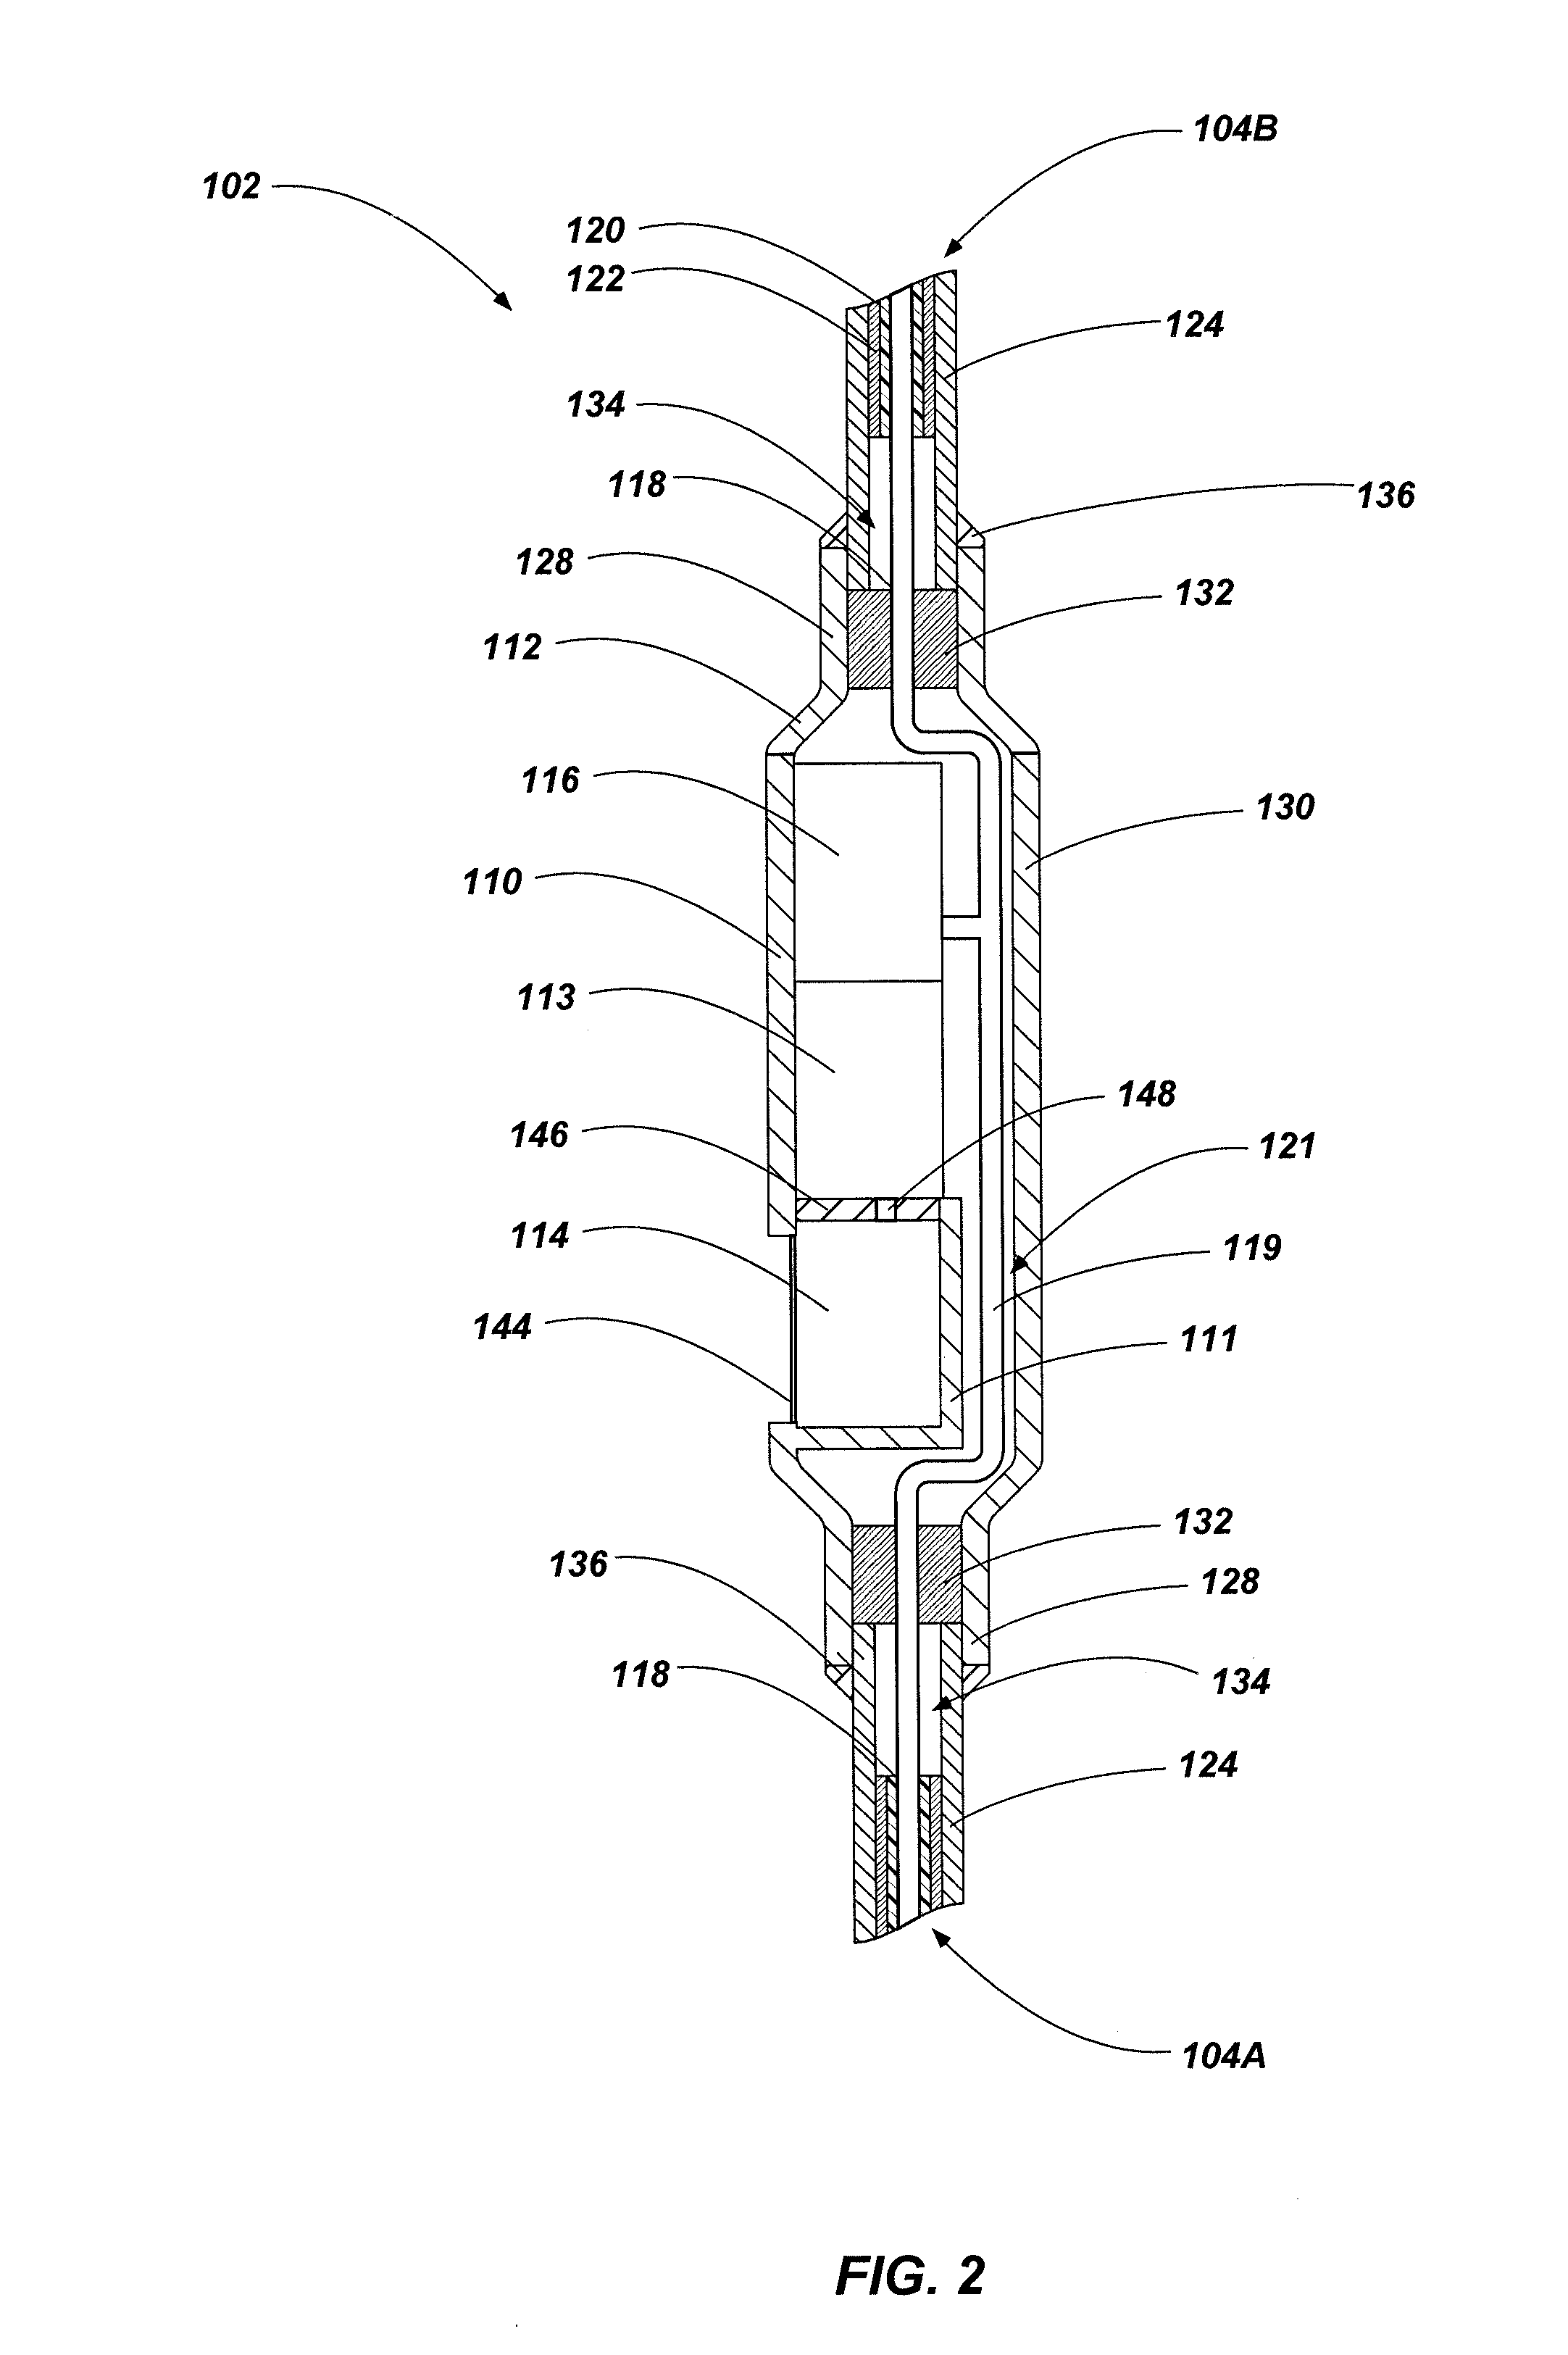 Downhole distributed pressure sensor arrays, downhole pressure sensors, downhole distributed pressure sensor arrays including quartz resonator sensors, and related methods